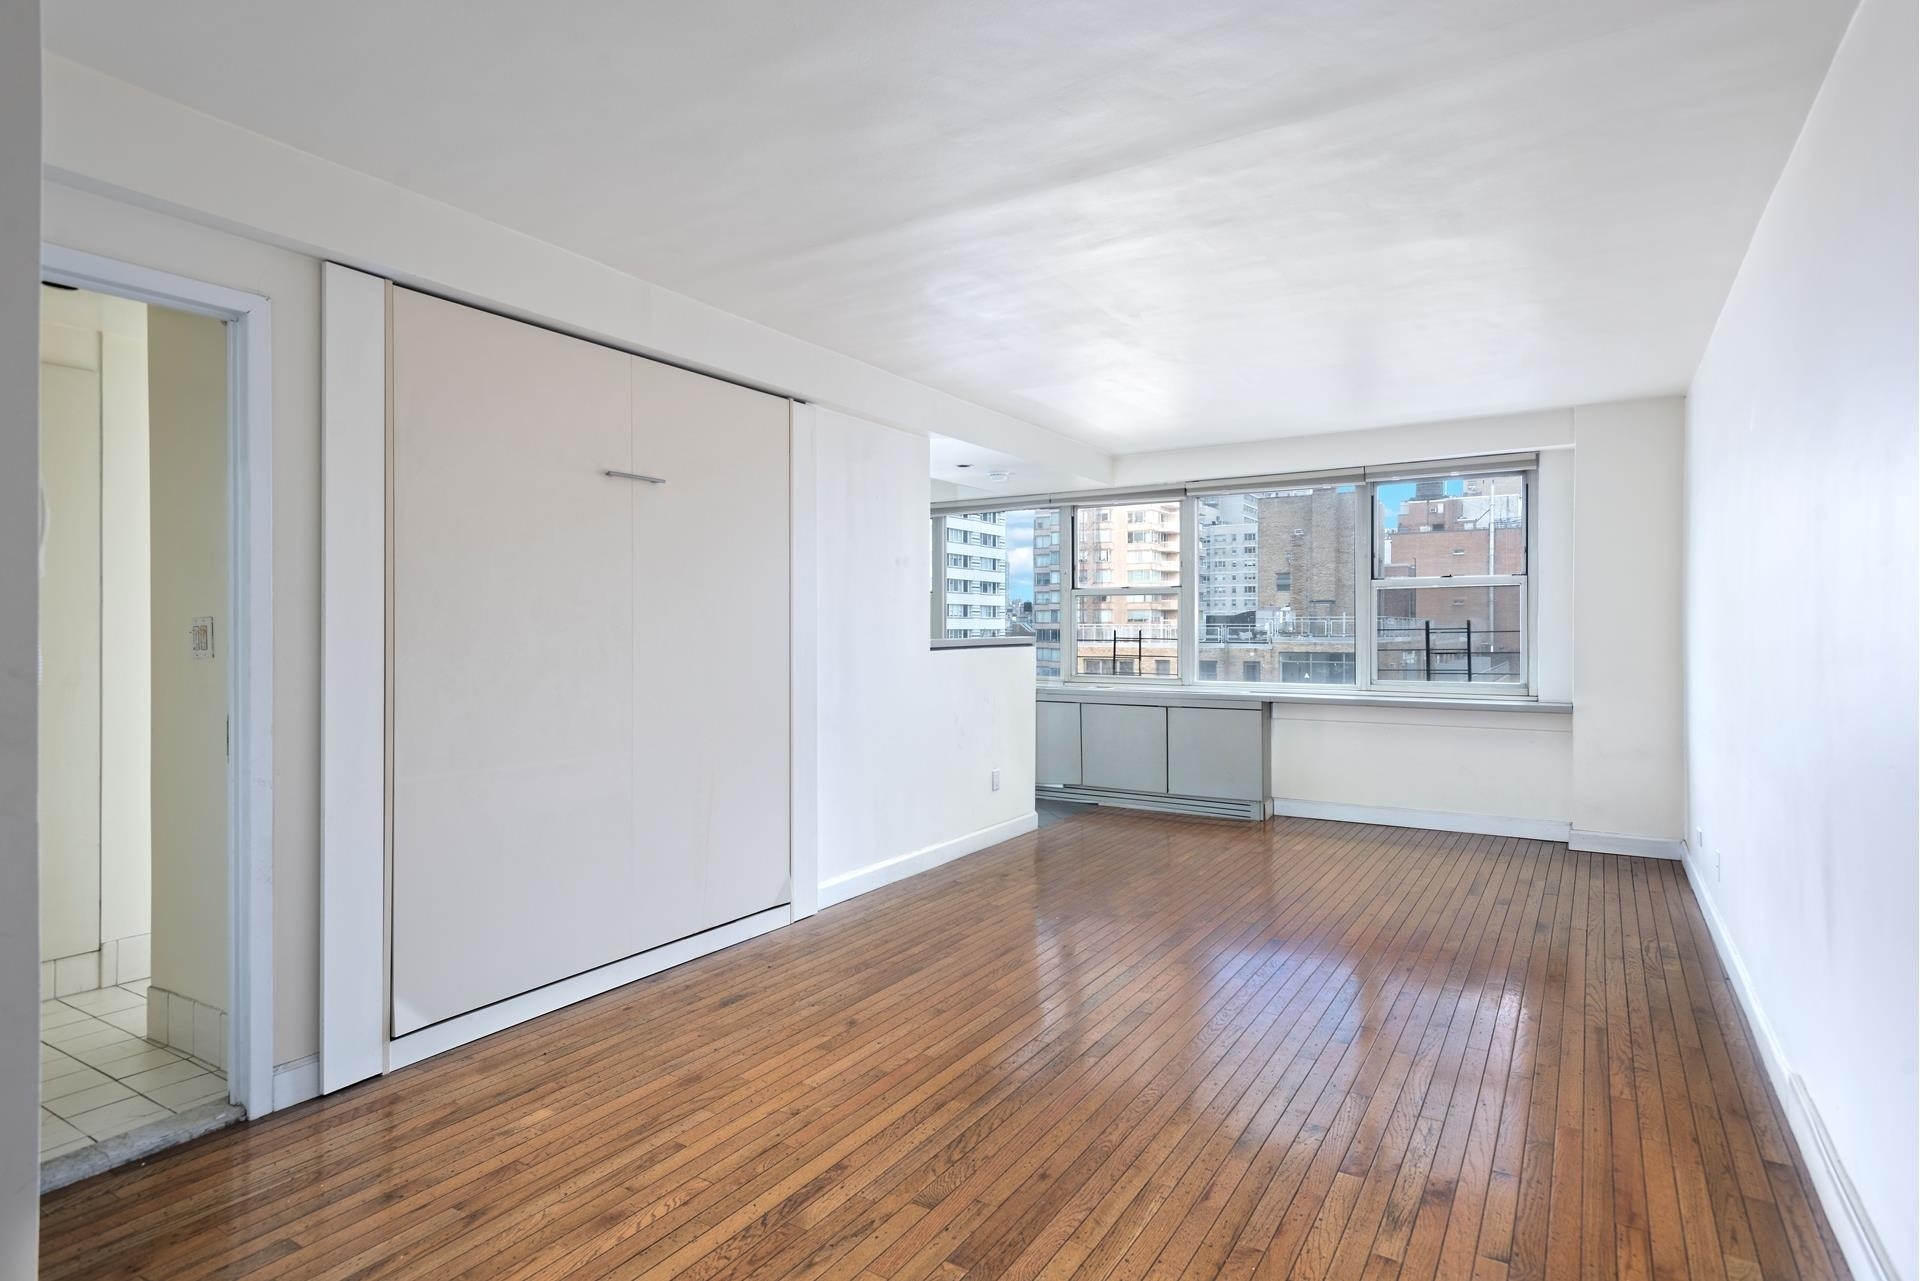 Co-op Properties for Sale at 233 E 69TH ST, 16H Lenox Hill, New York, NY 10021